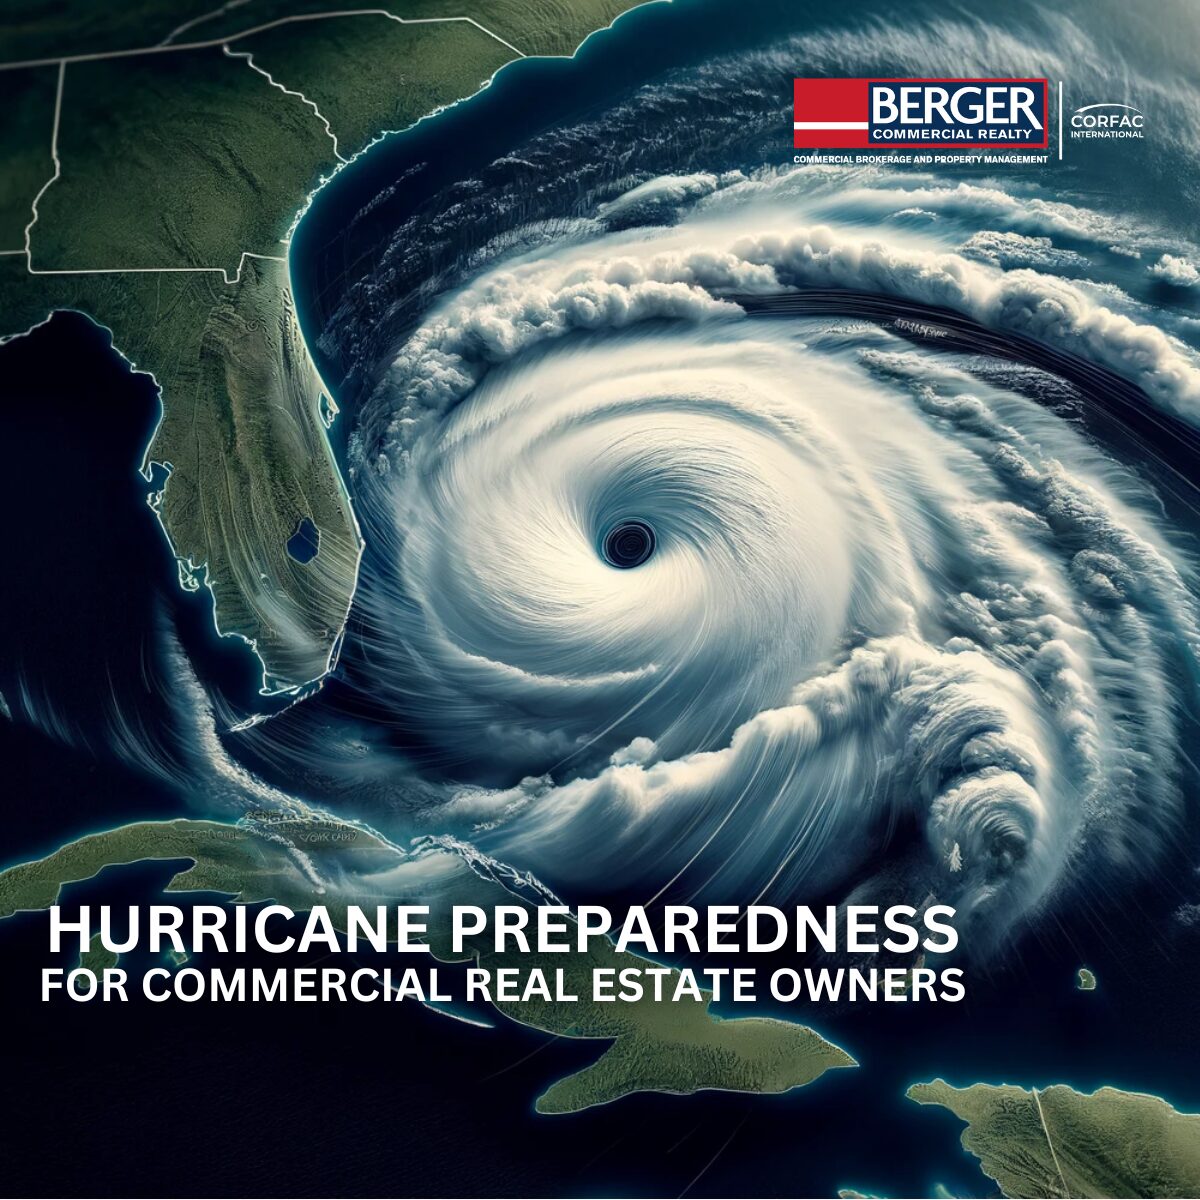 Hurricane Preparedness For Commercial Real Estate Owners In South Florida